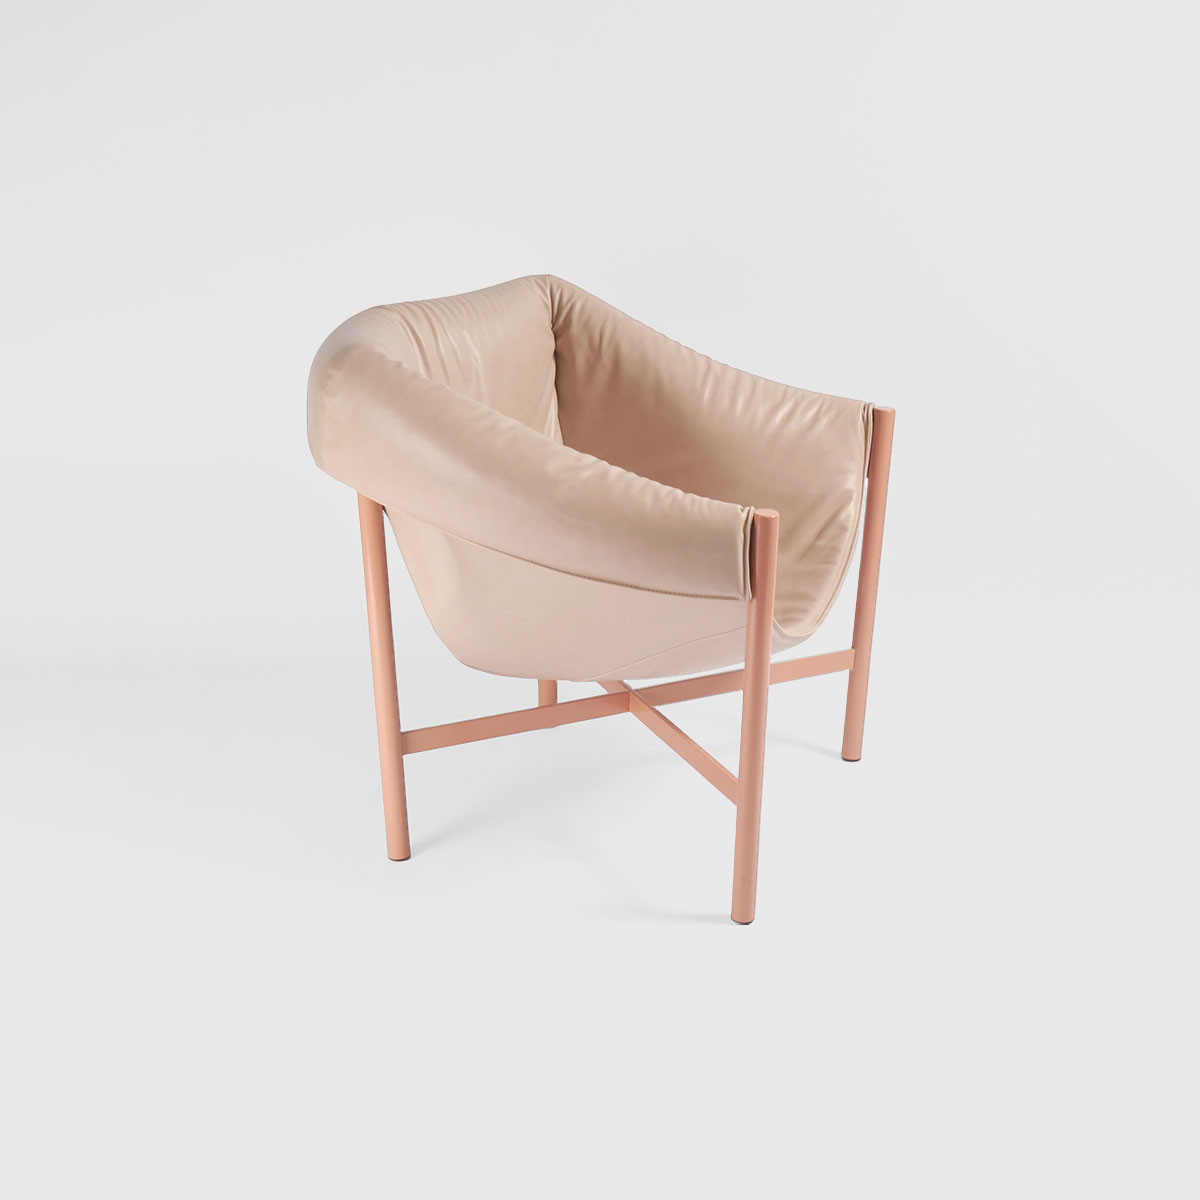 Falstaff armchair in nude by Stefan Diez for DANTE - Goods and Bads